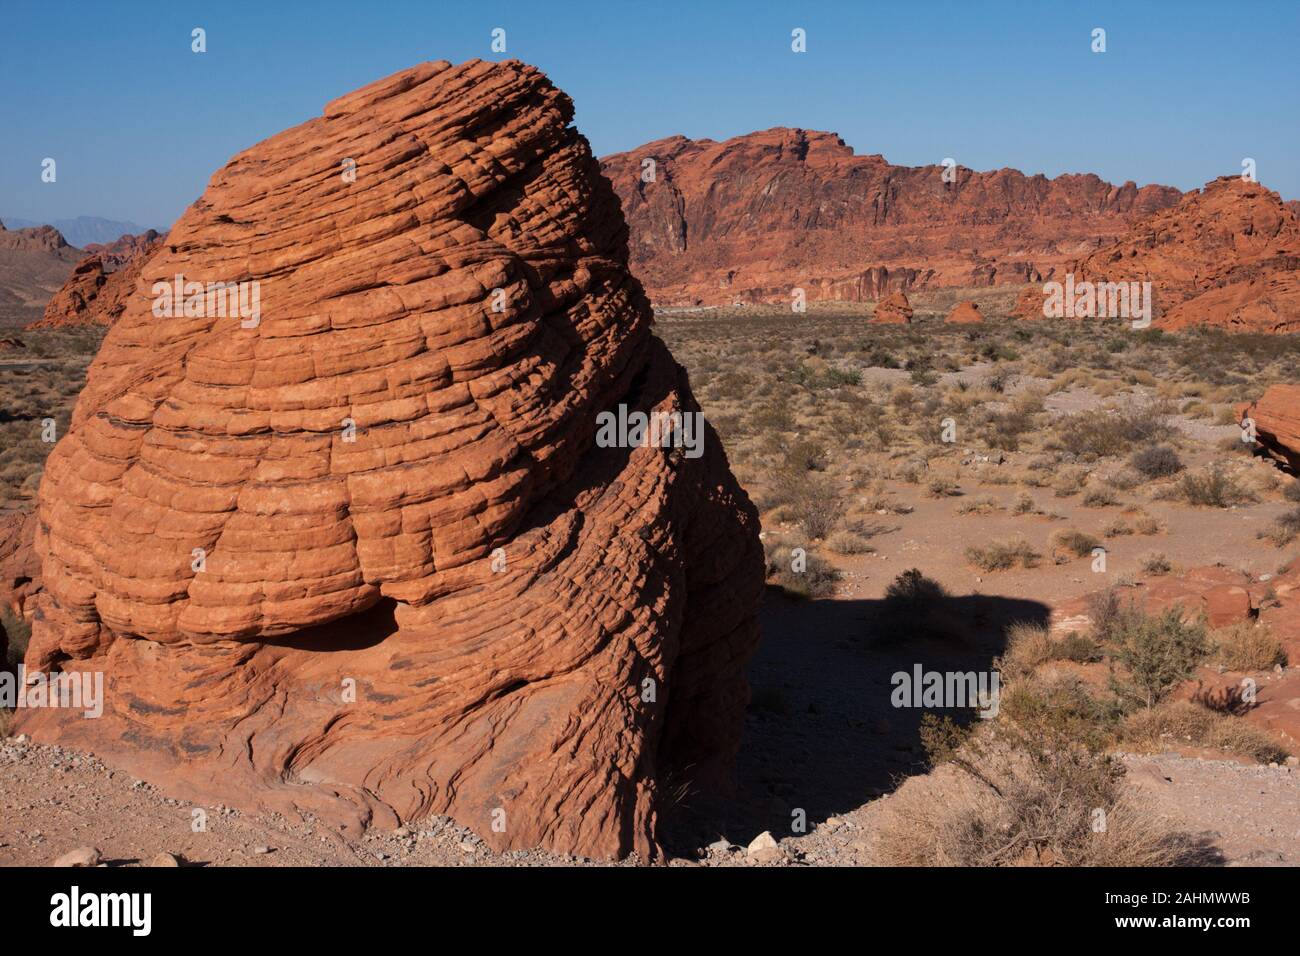 An interesting brain like rock formation in Nevada's Valley of Fire State Park. Stock Photo